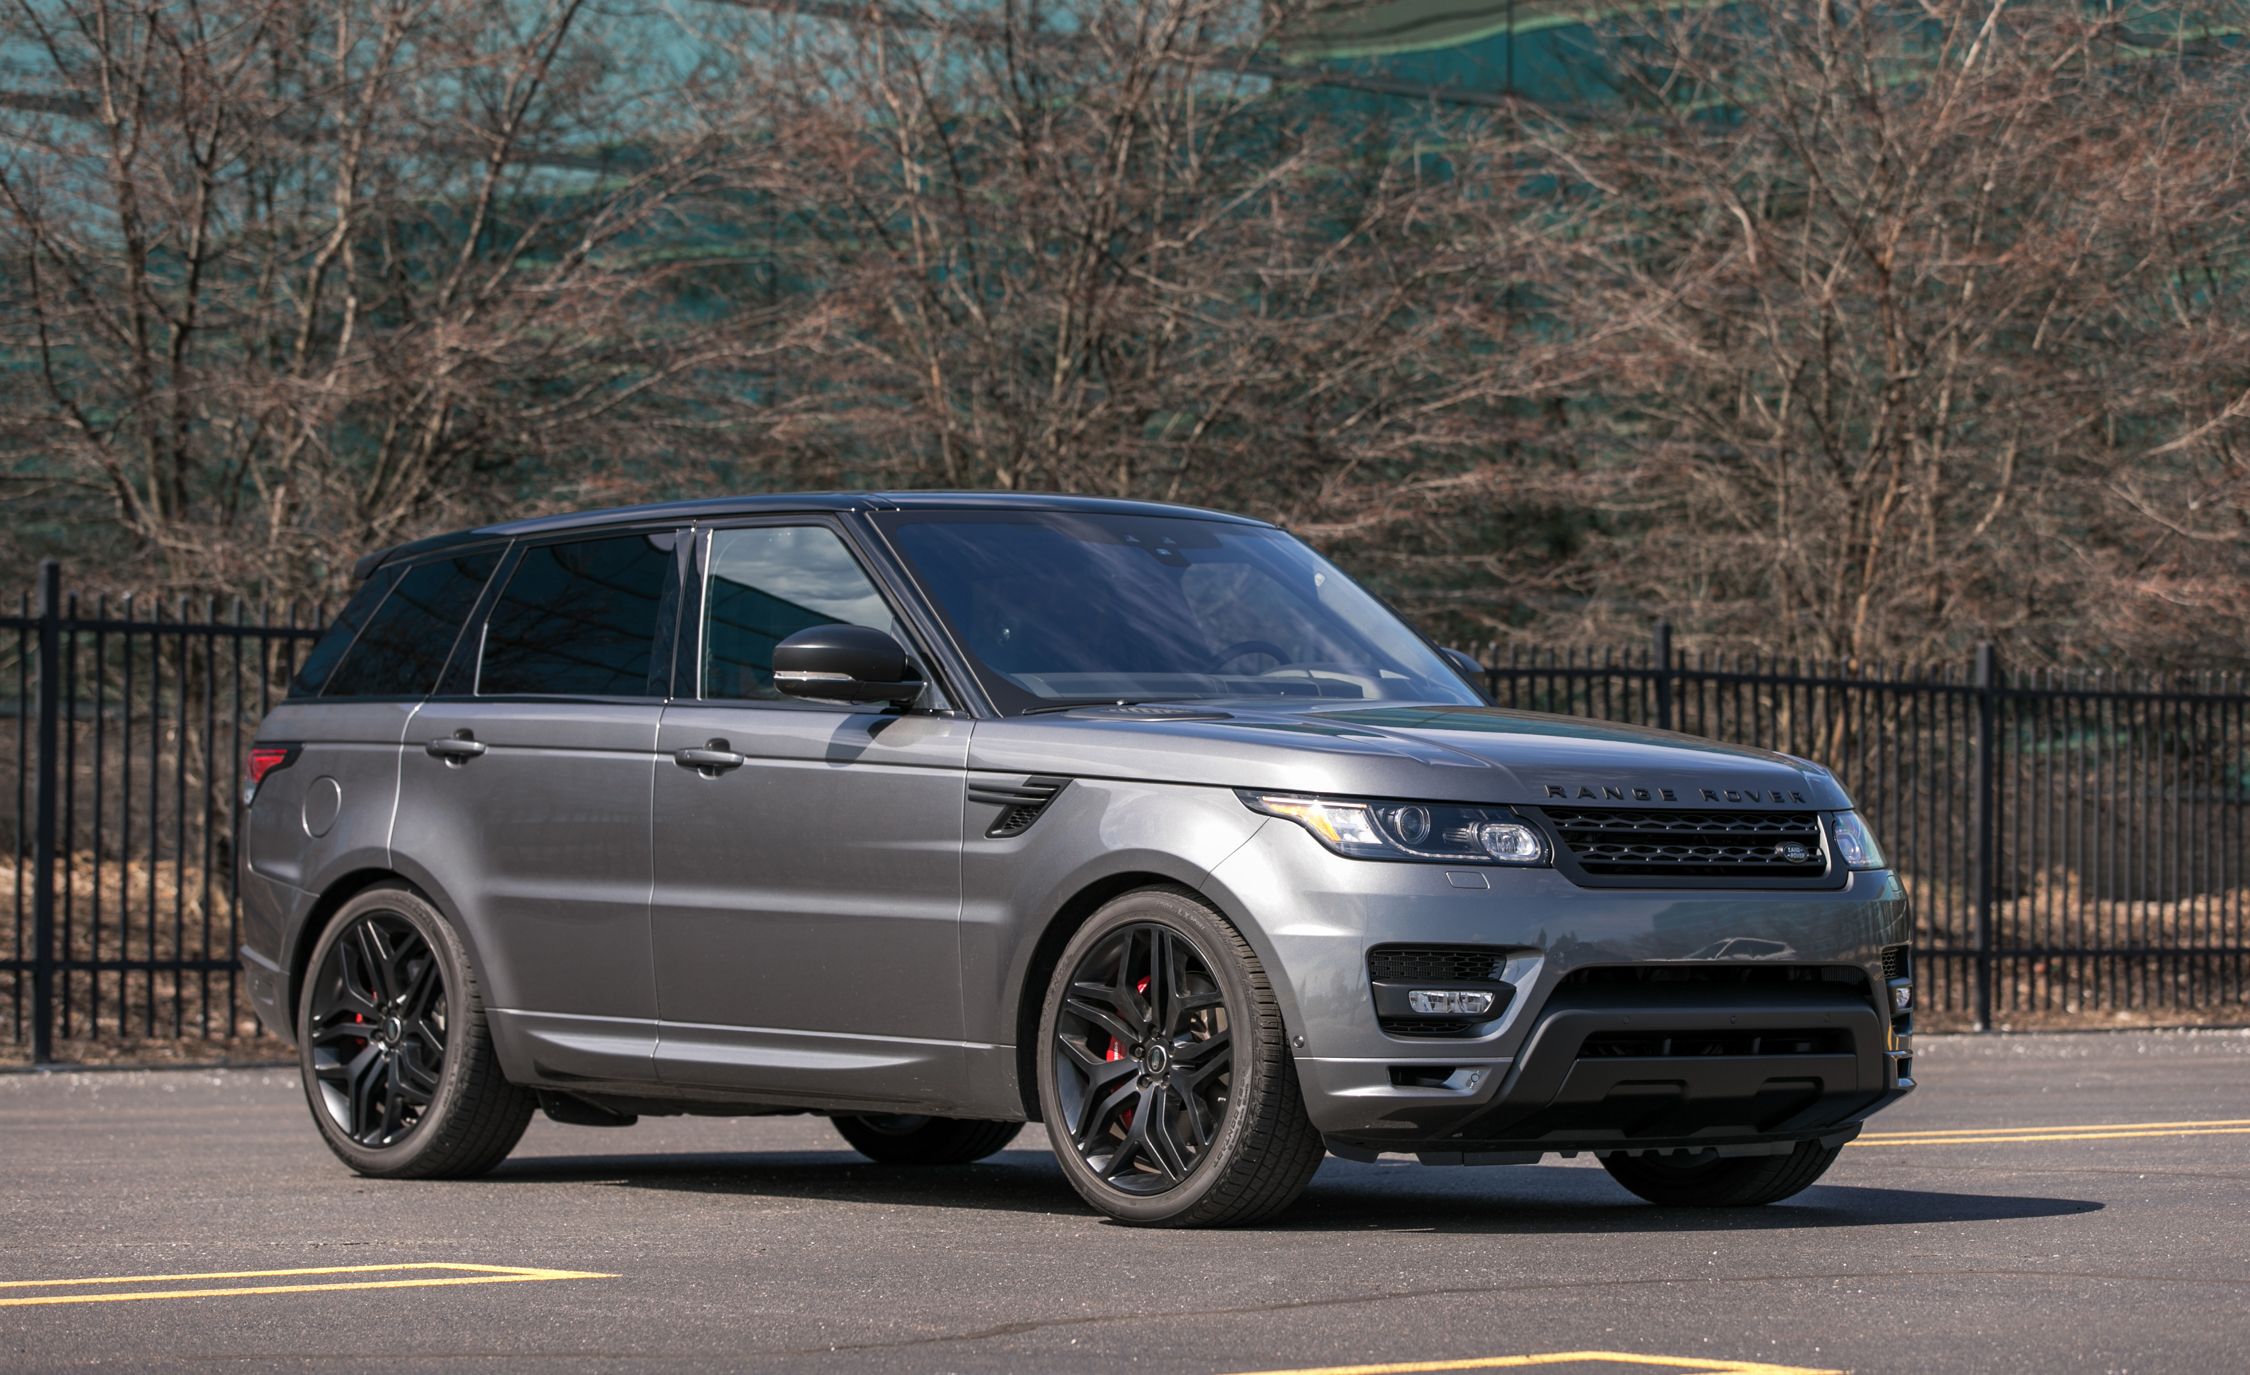 2017 Land Rover Range Rover Sport Supercharged Svr Engine And